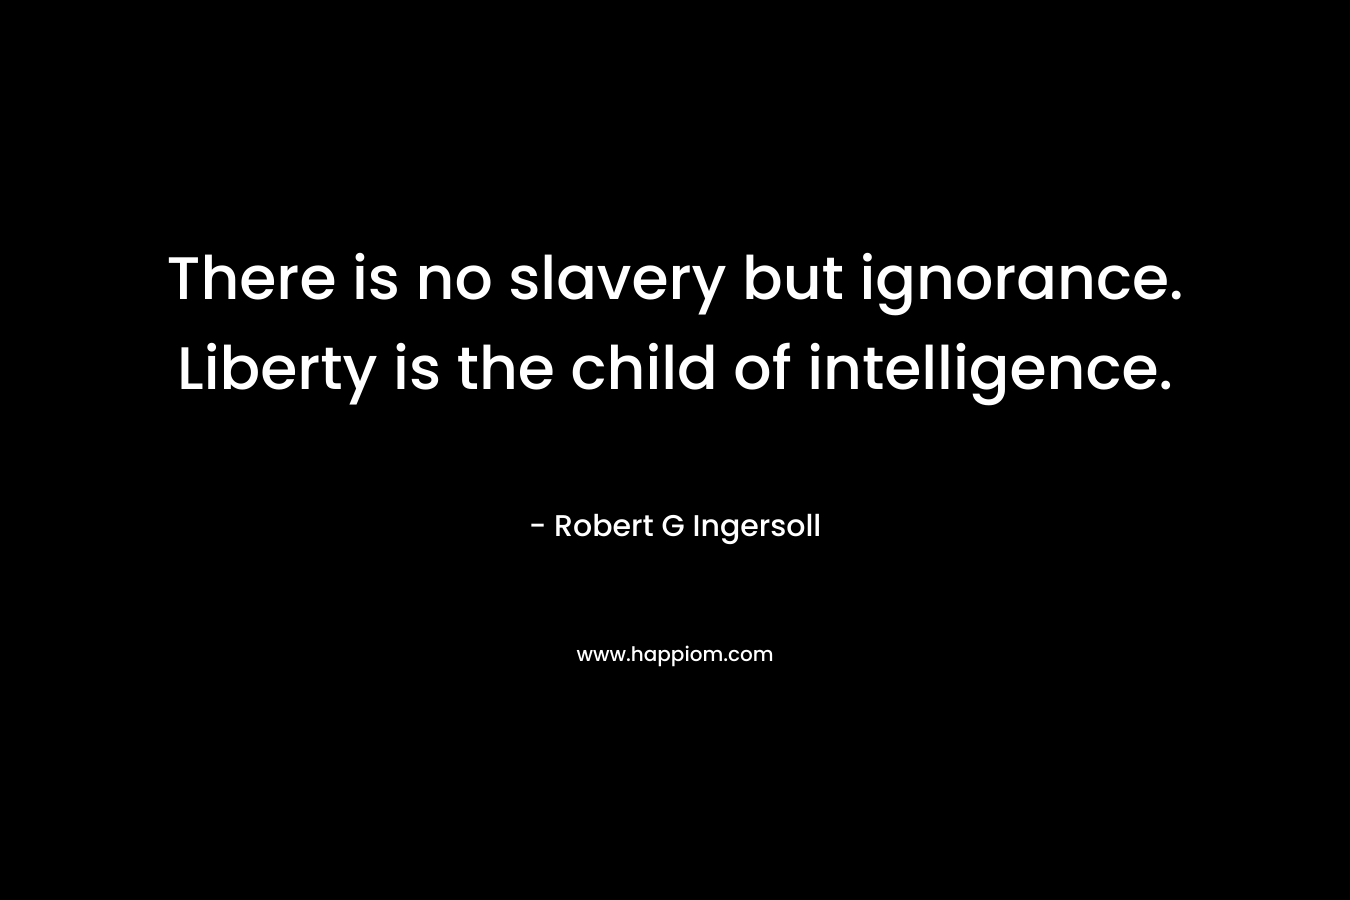 There is no slavery but ignorance. Liberty is the child of intelligence.